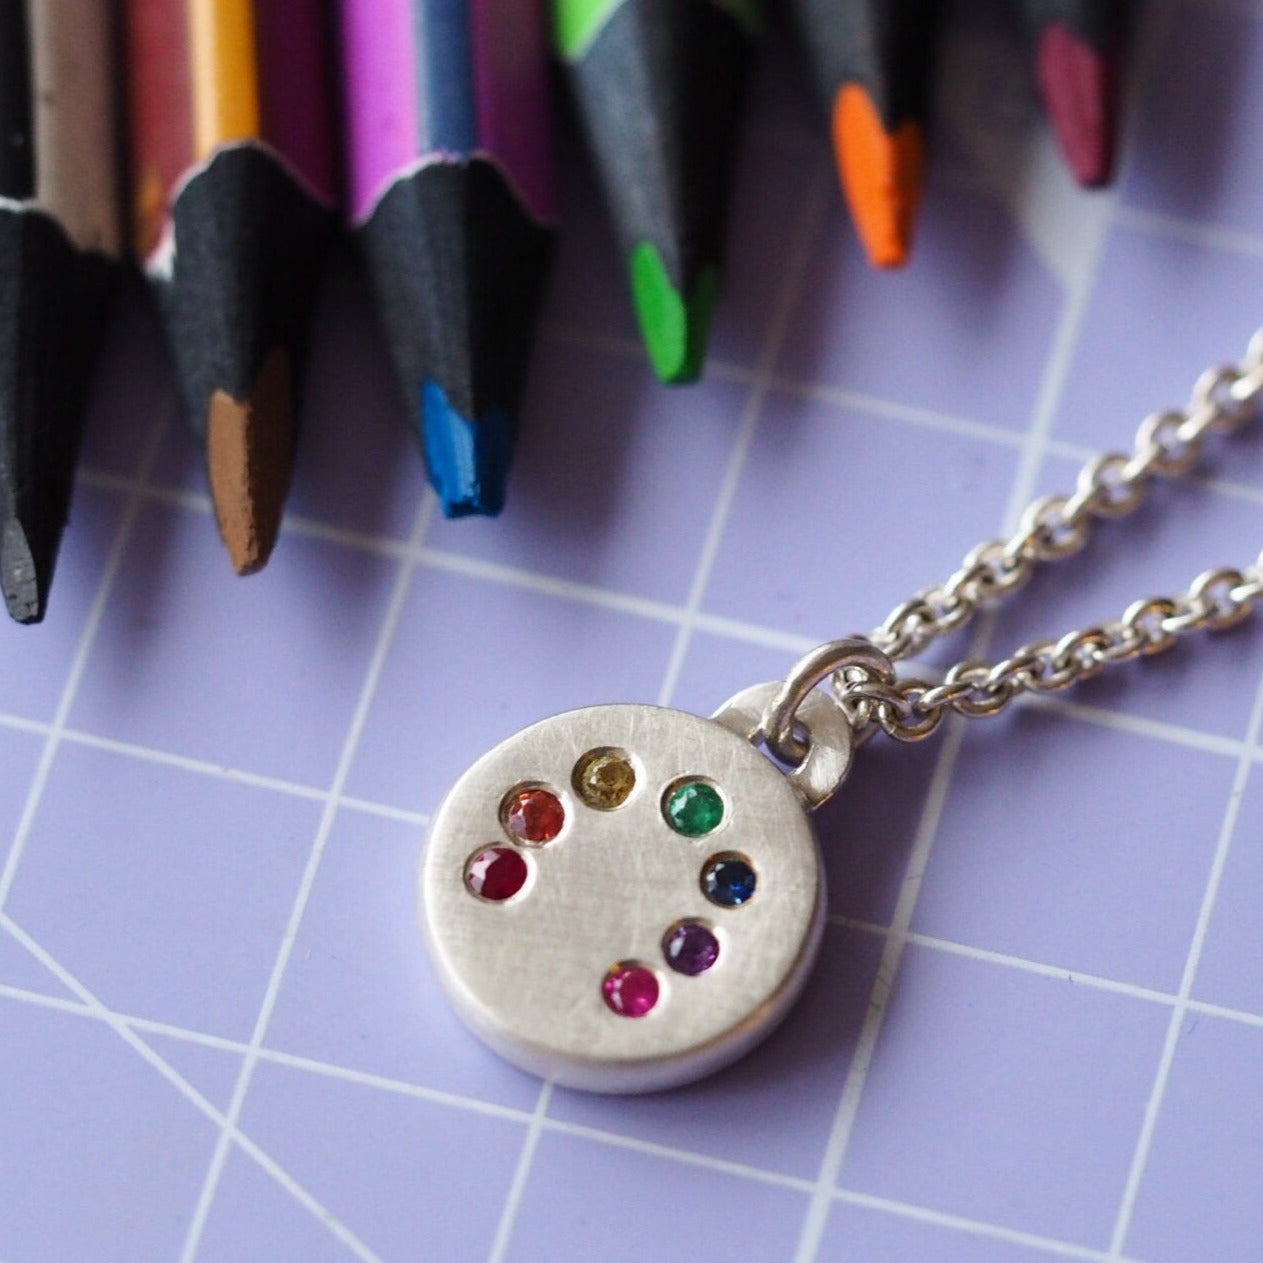 Rainbow Necklace - Sterling Silver and Precious Stones